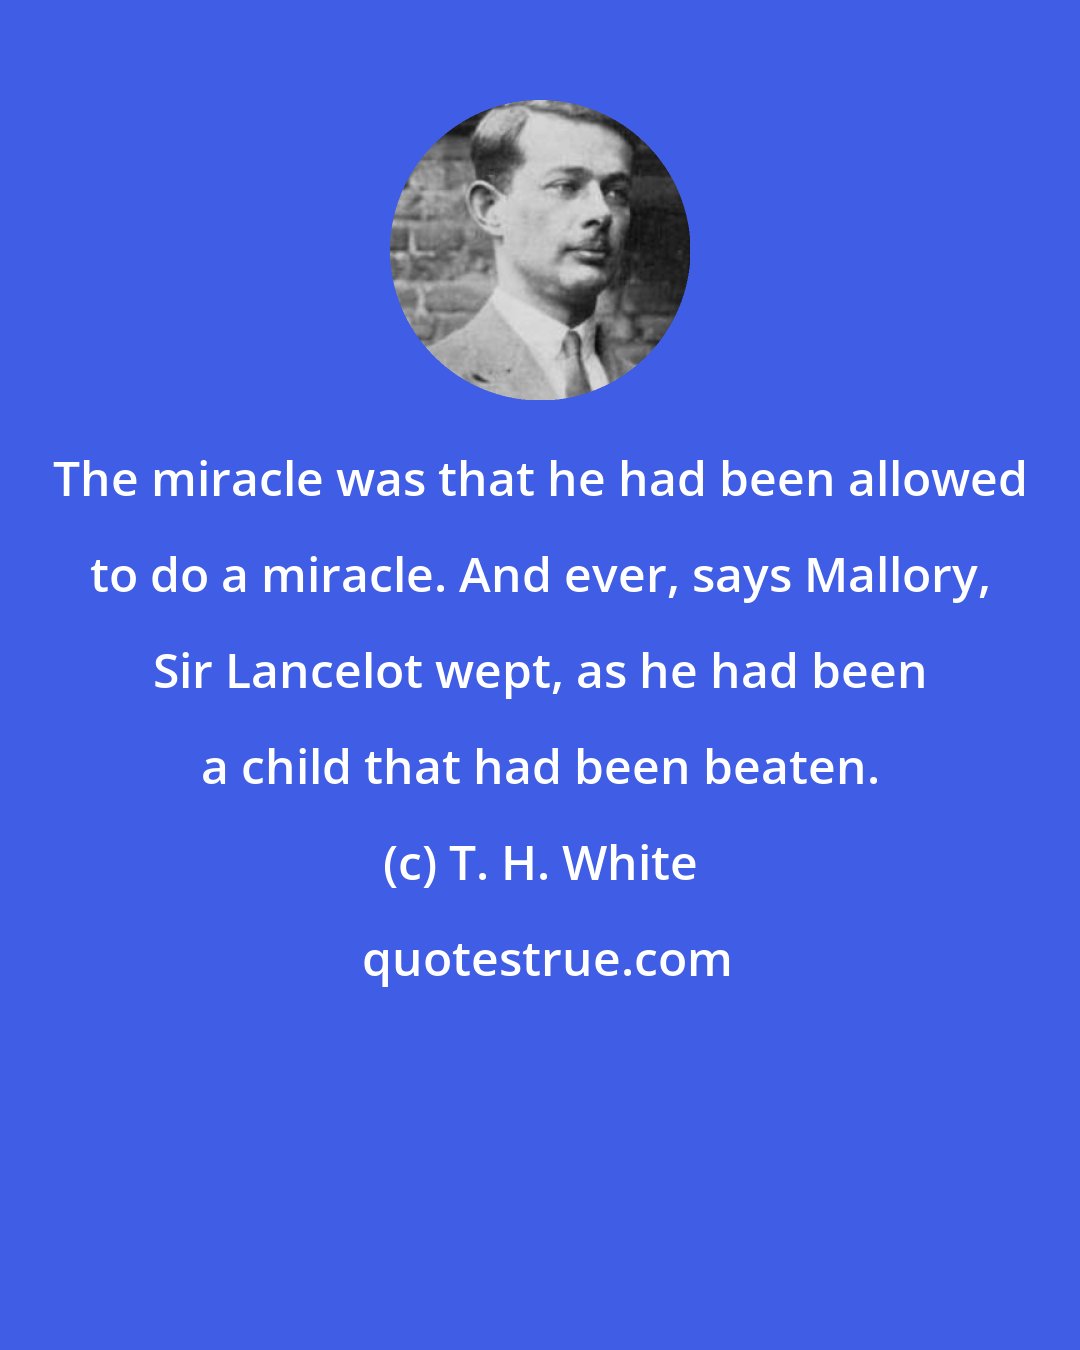 T. H. White: The miracle was that he had been allowed to do a miracle. And ever, says Mallory, Sir Lancelot wept, as he had been a child that had been beaten.